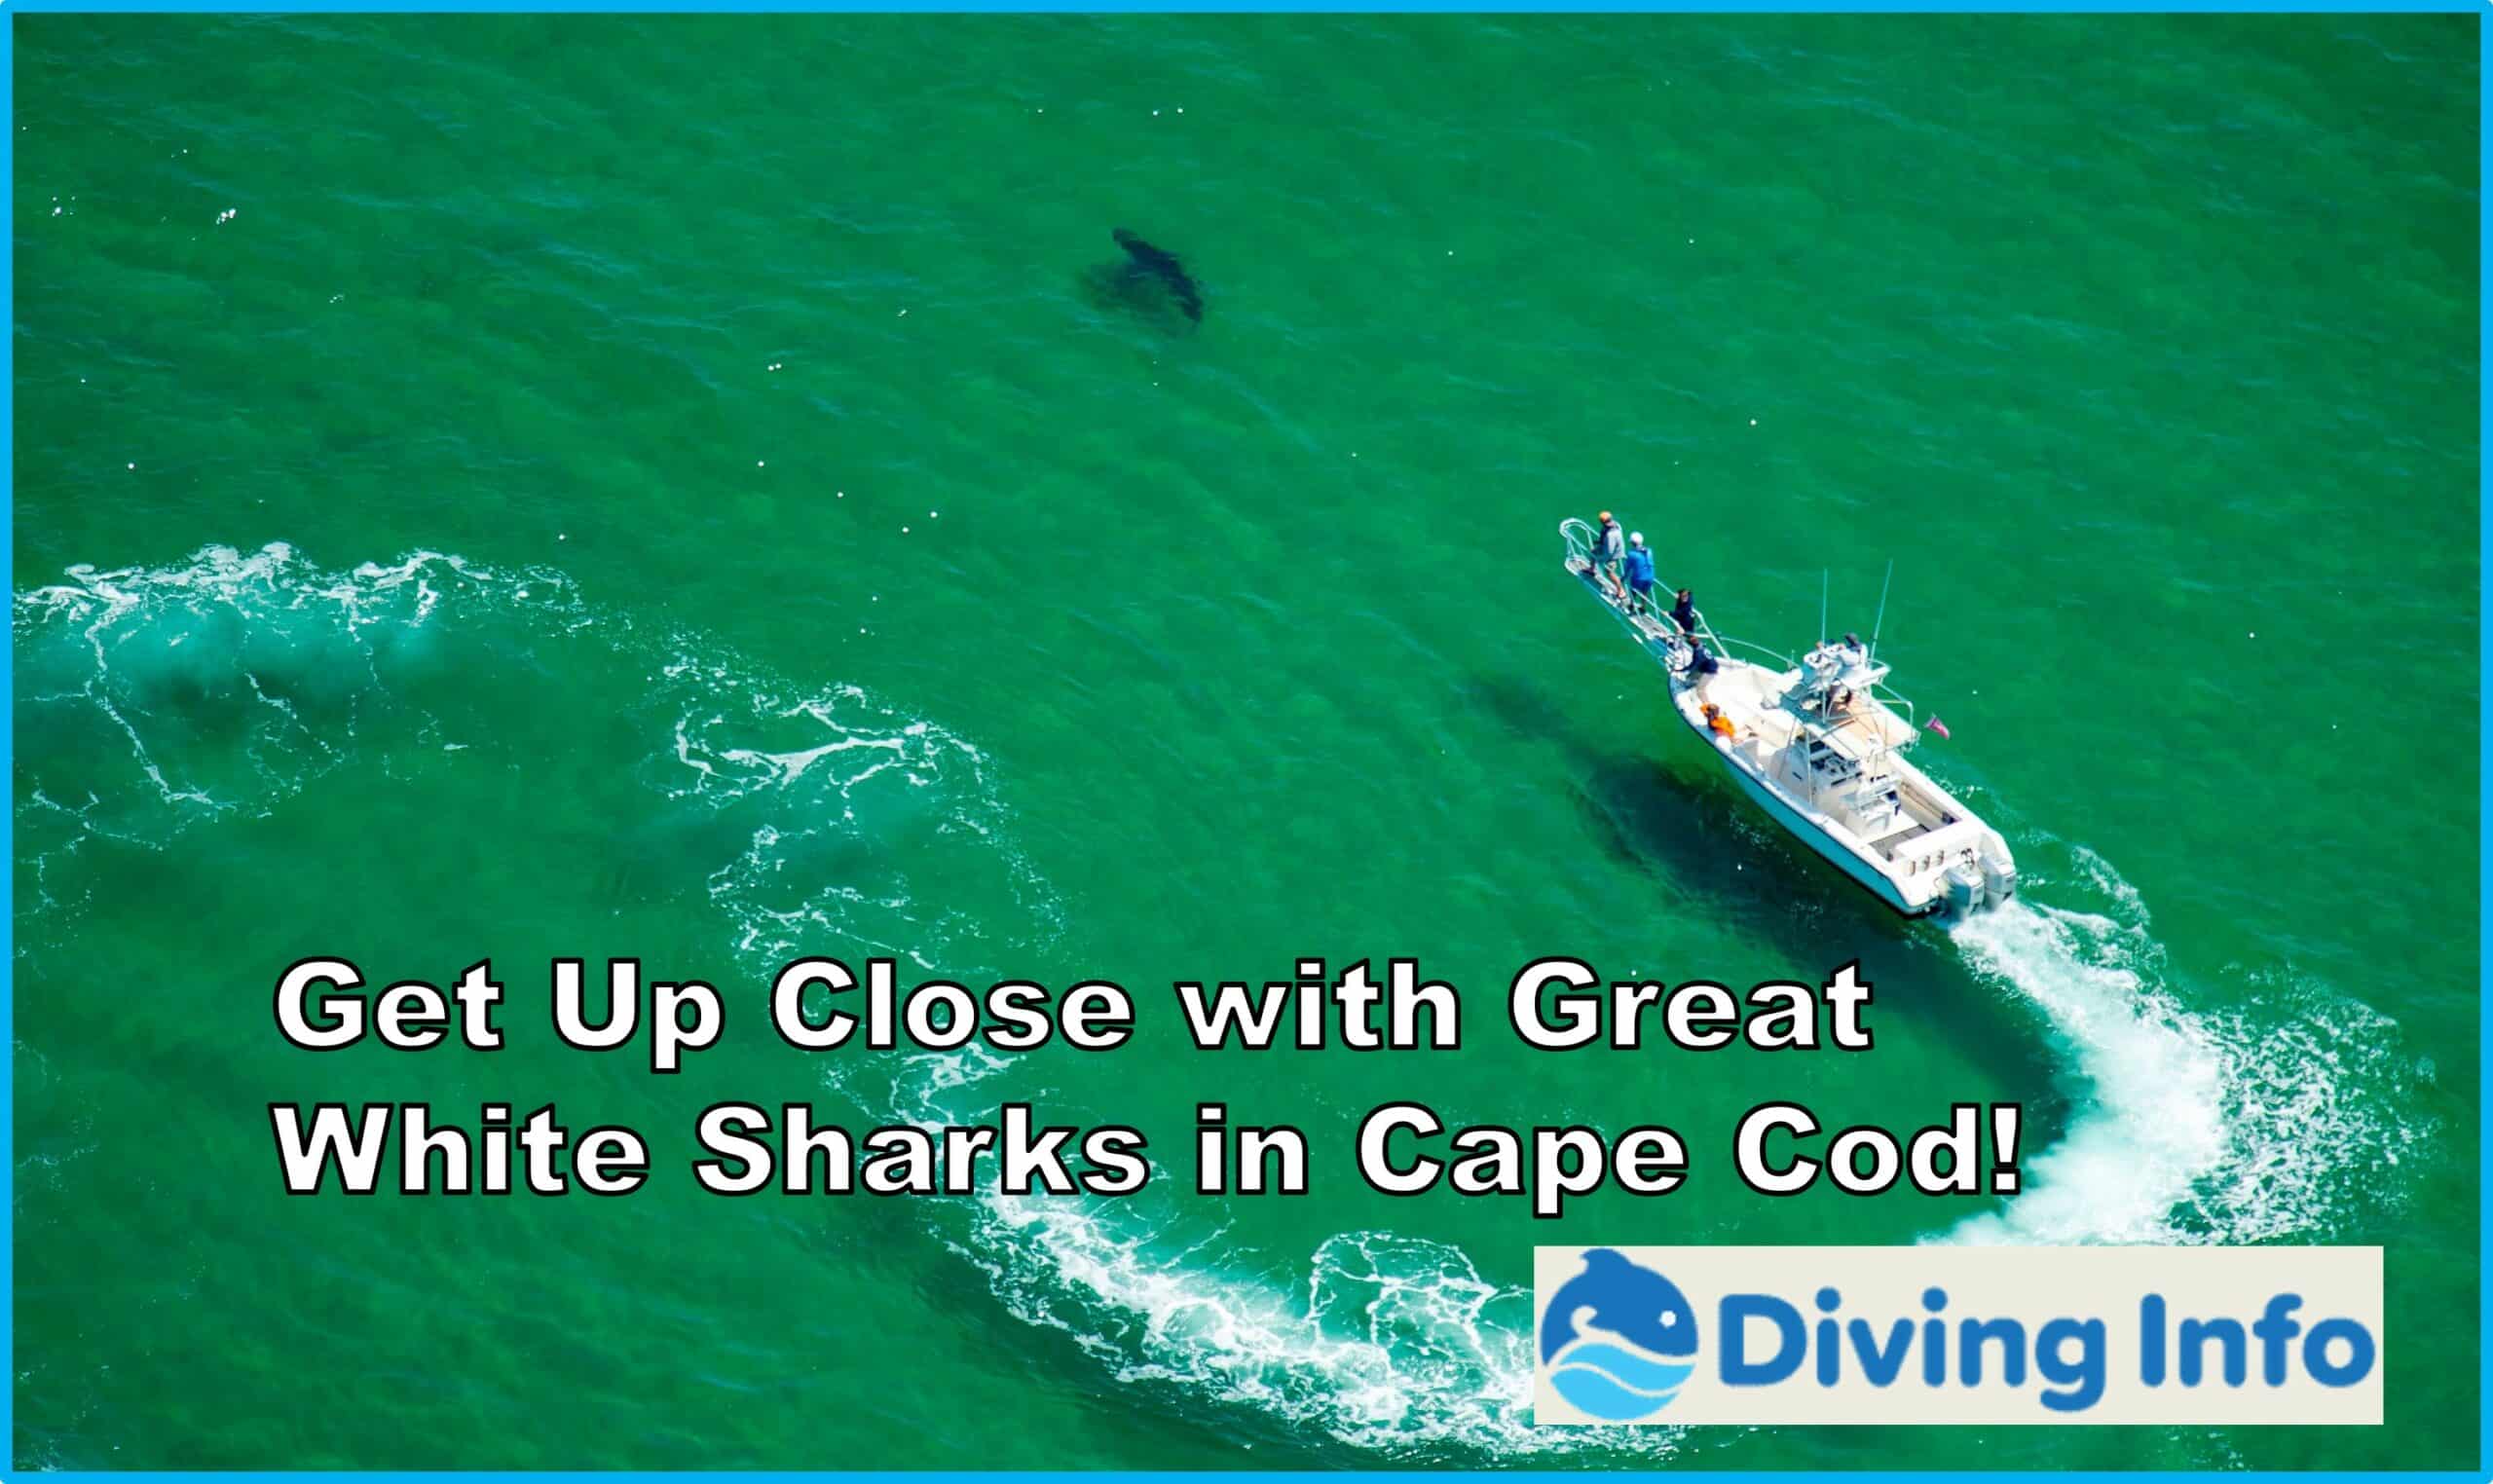 Get Up Close with Great White Sharks in Cape Cod